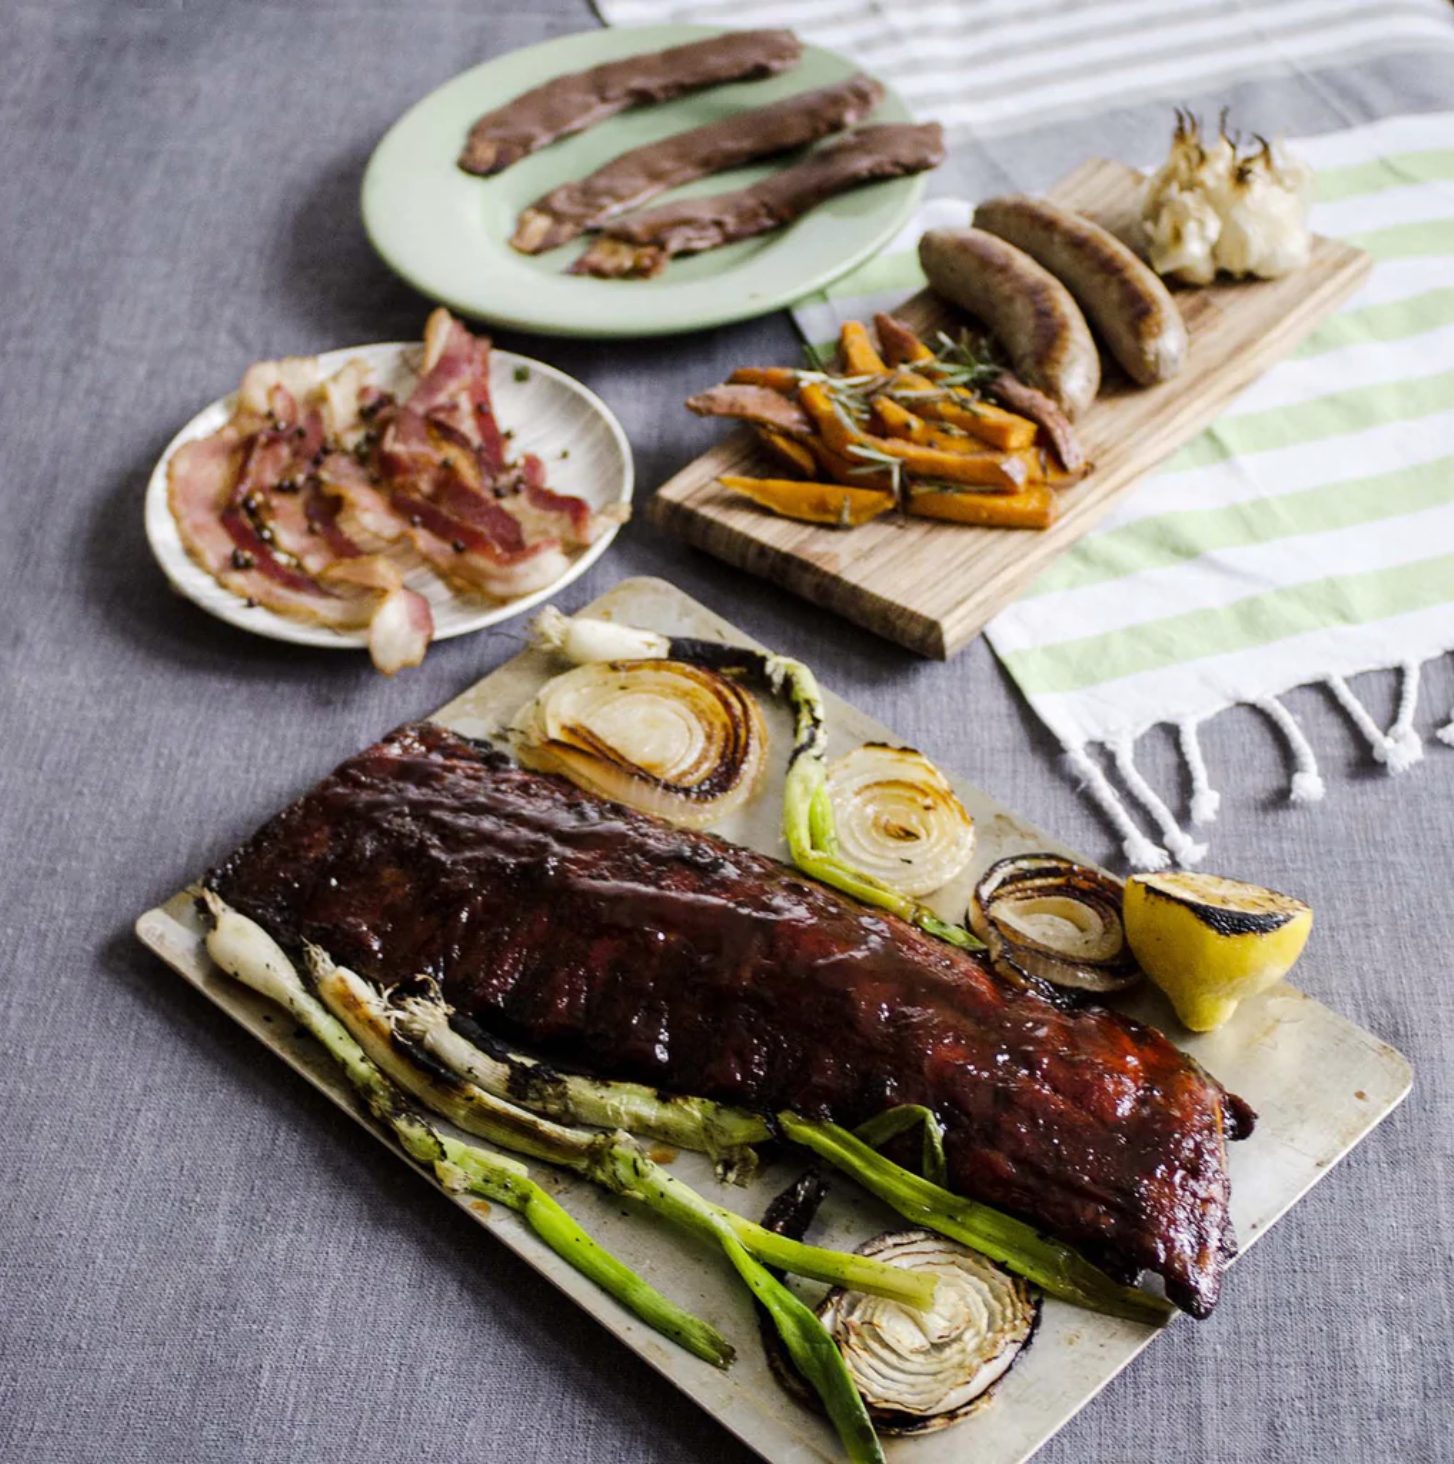 Plates and serving platters across a gray table with ribs, grilled vegetables, bacon, and sausage